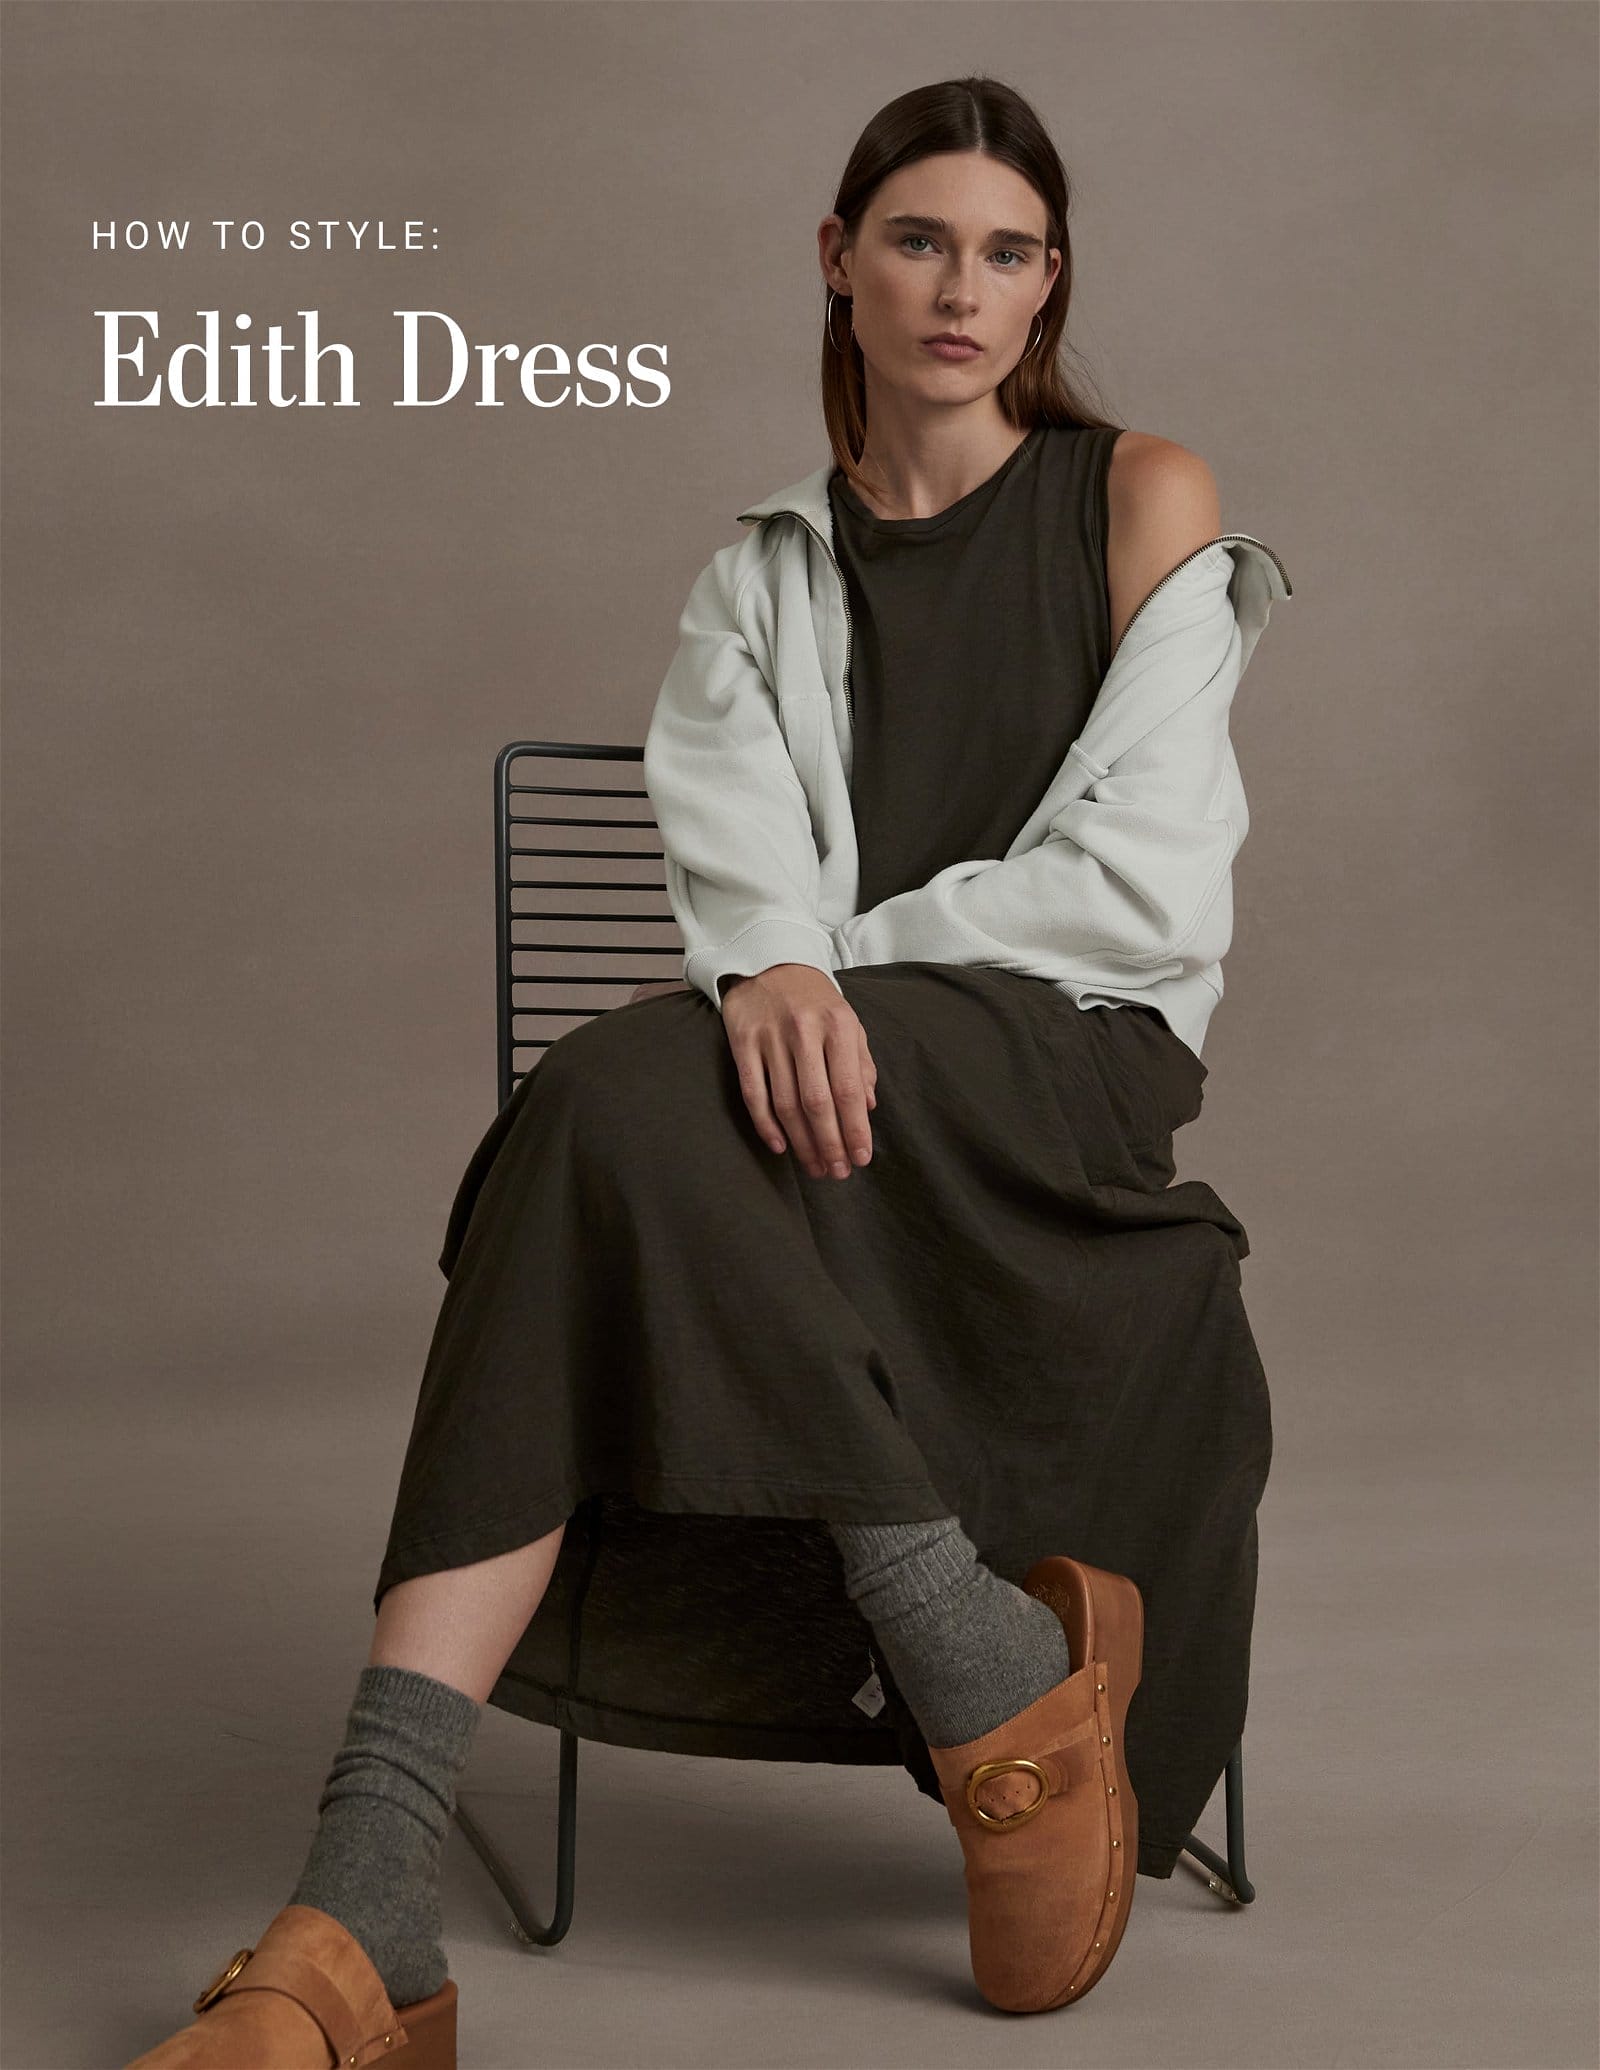 HOW TO STYLE: Edith Dress